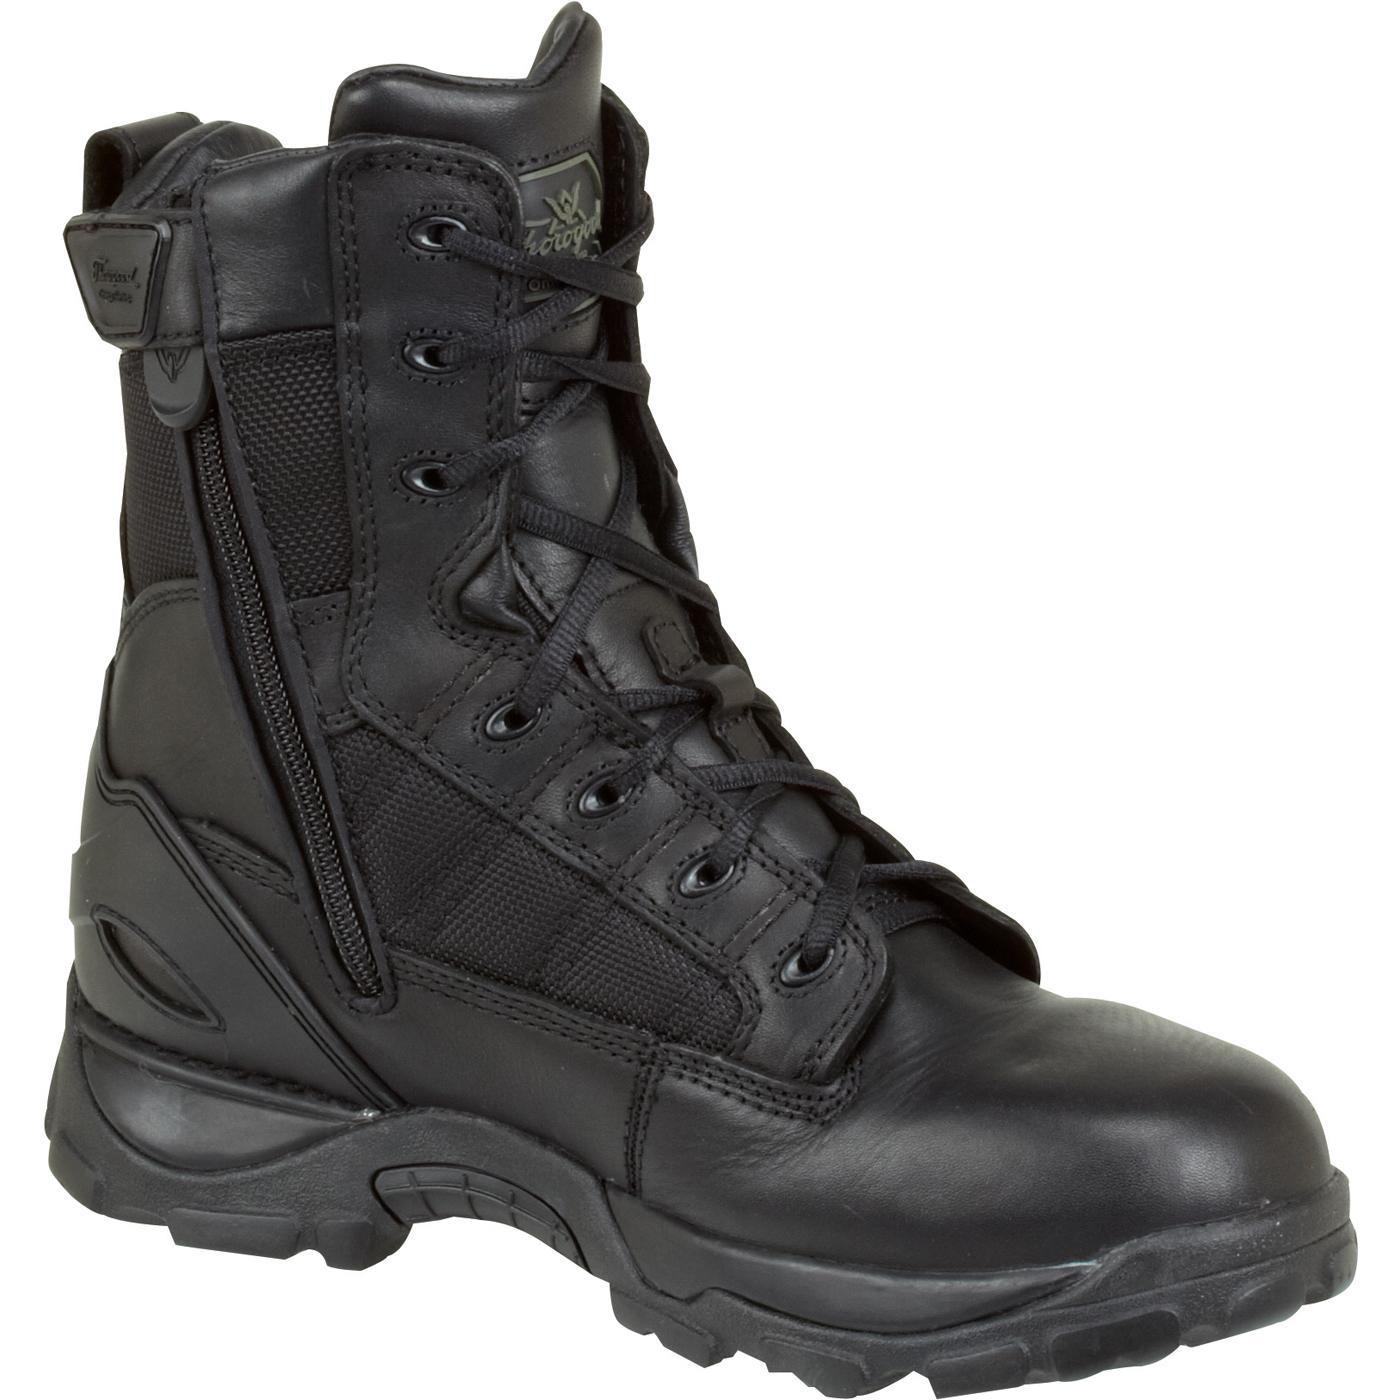 Thorogood Sniper Waterproof Lace-Up with Side Zipper Duty Boot, 834-6760